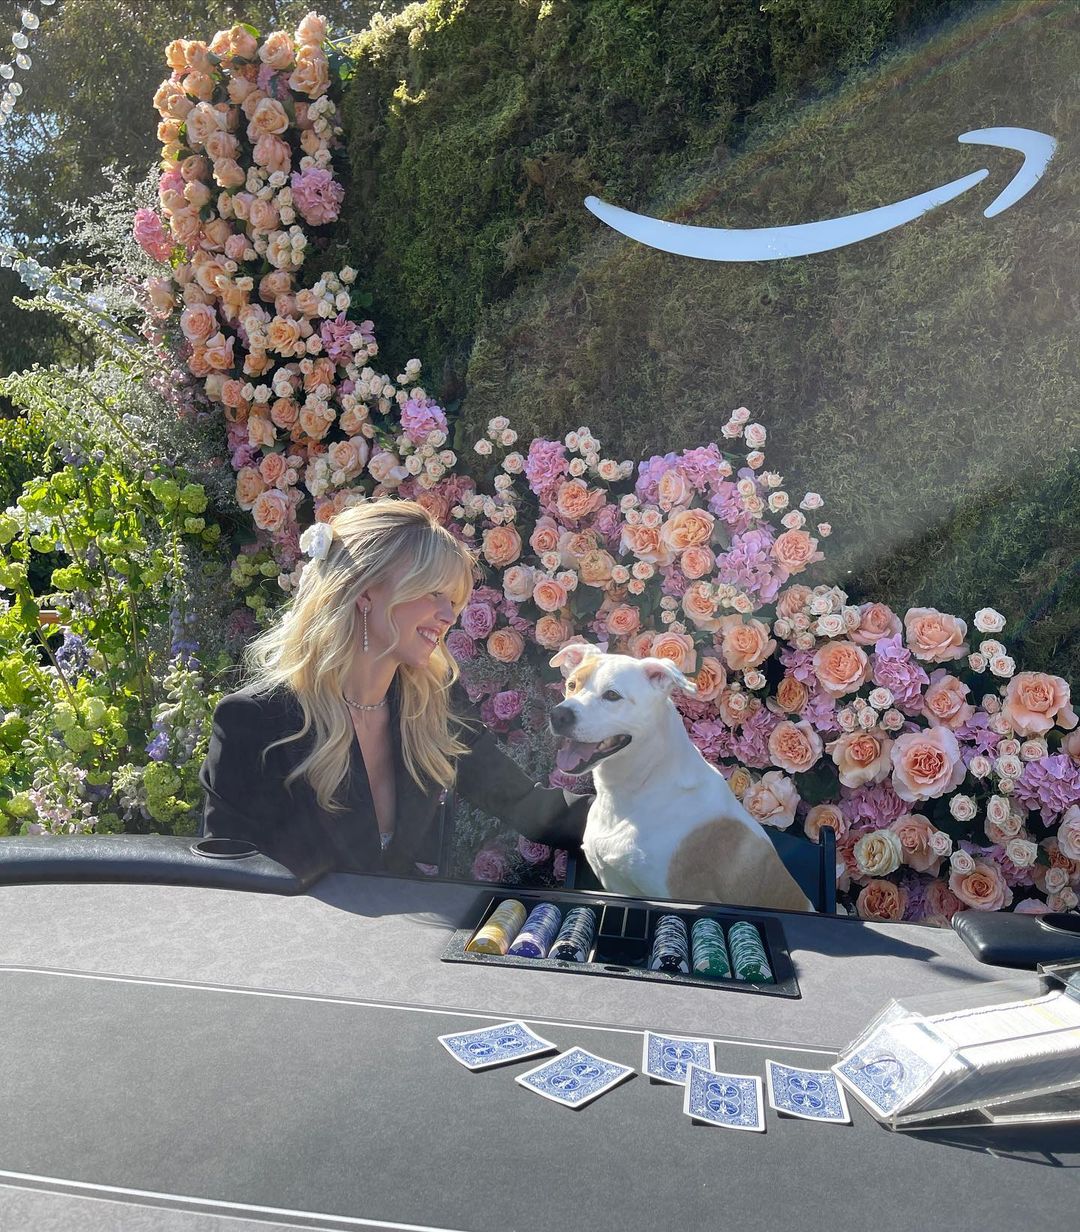 thank you @Amazon for helping tank and I go all in for our party!